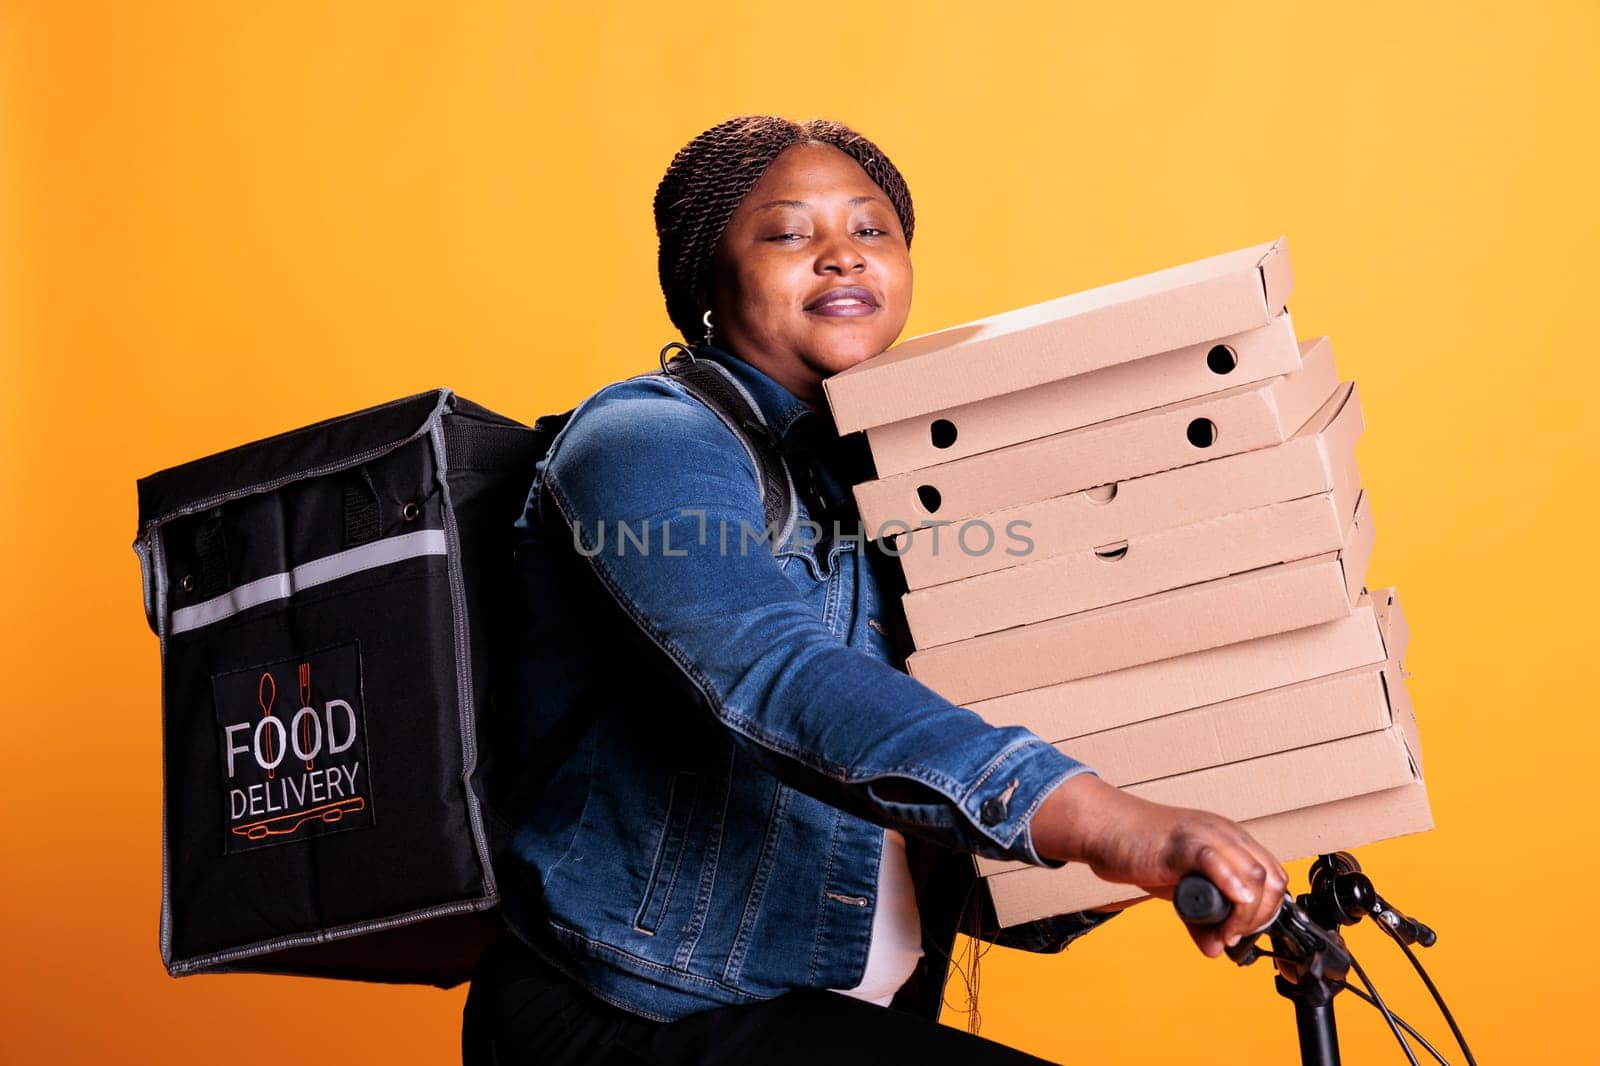 Pizzeria delivery worker carrying stack of cardboard full with pizza delivering takeaway food order to customer during lunch time, standing in studio. Restaurant employee using bike as transportation